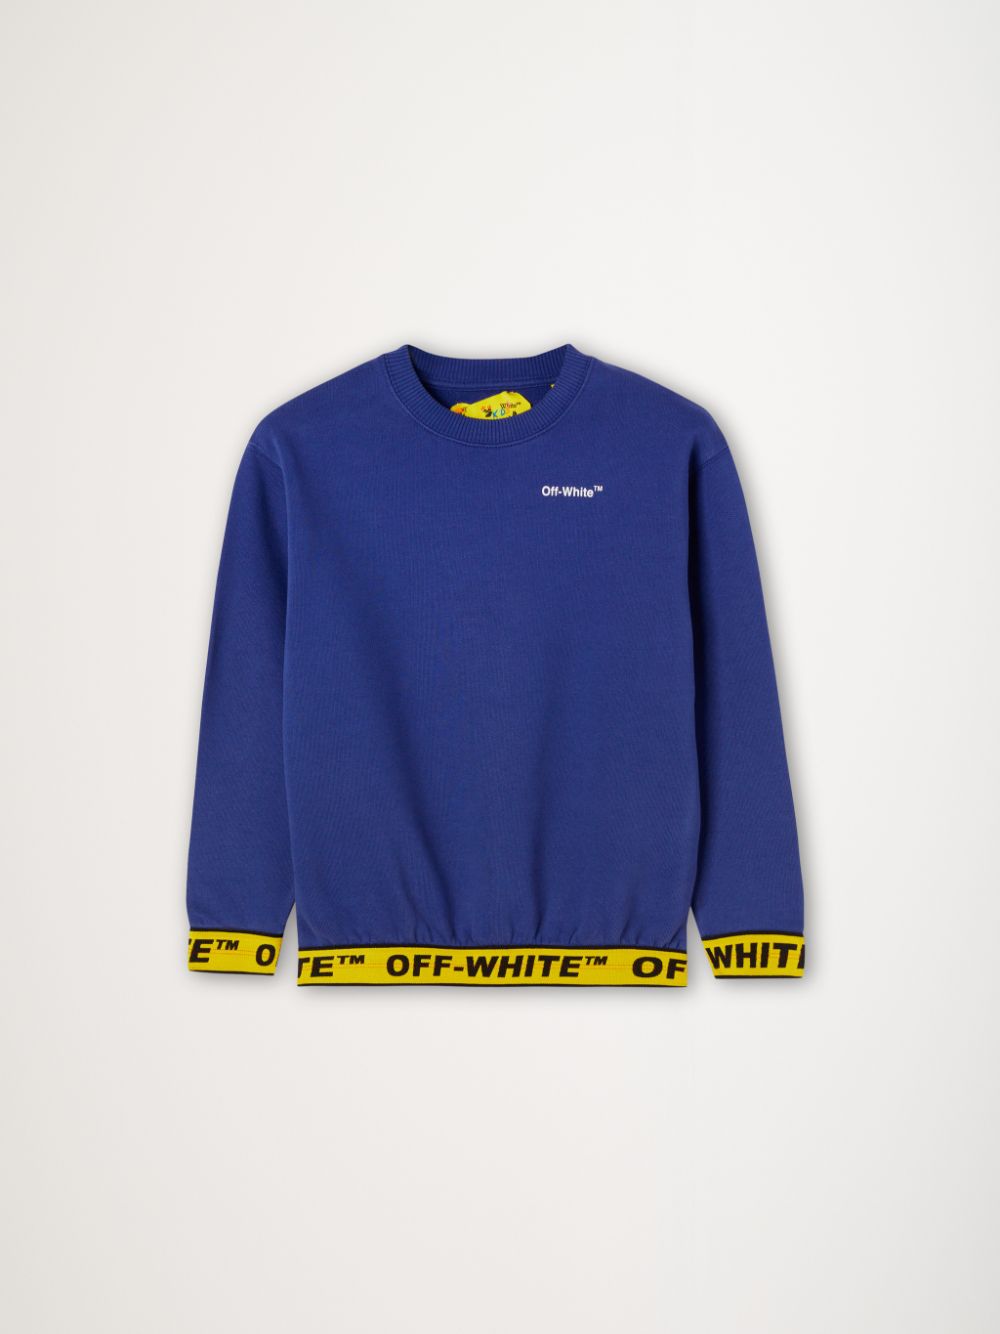 LOGO INDUSTRIAL CREWNECK in blue | Off-White™ Official XC